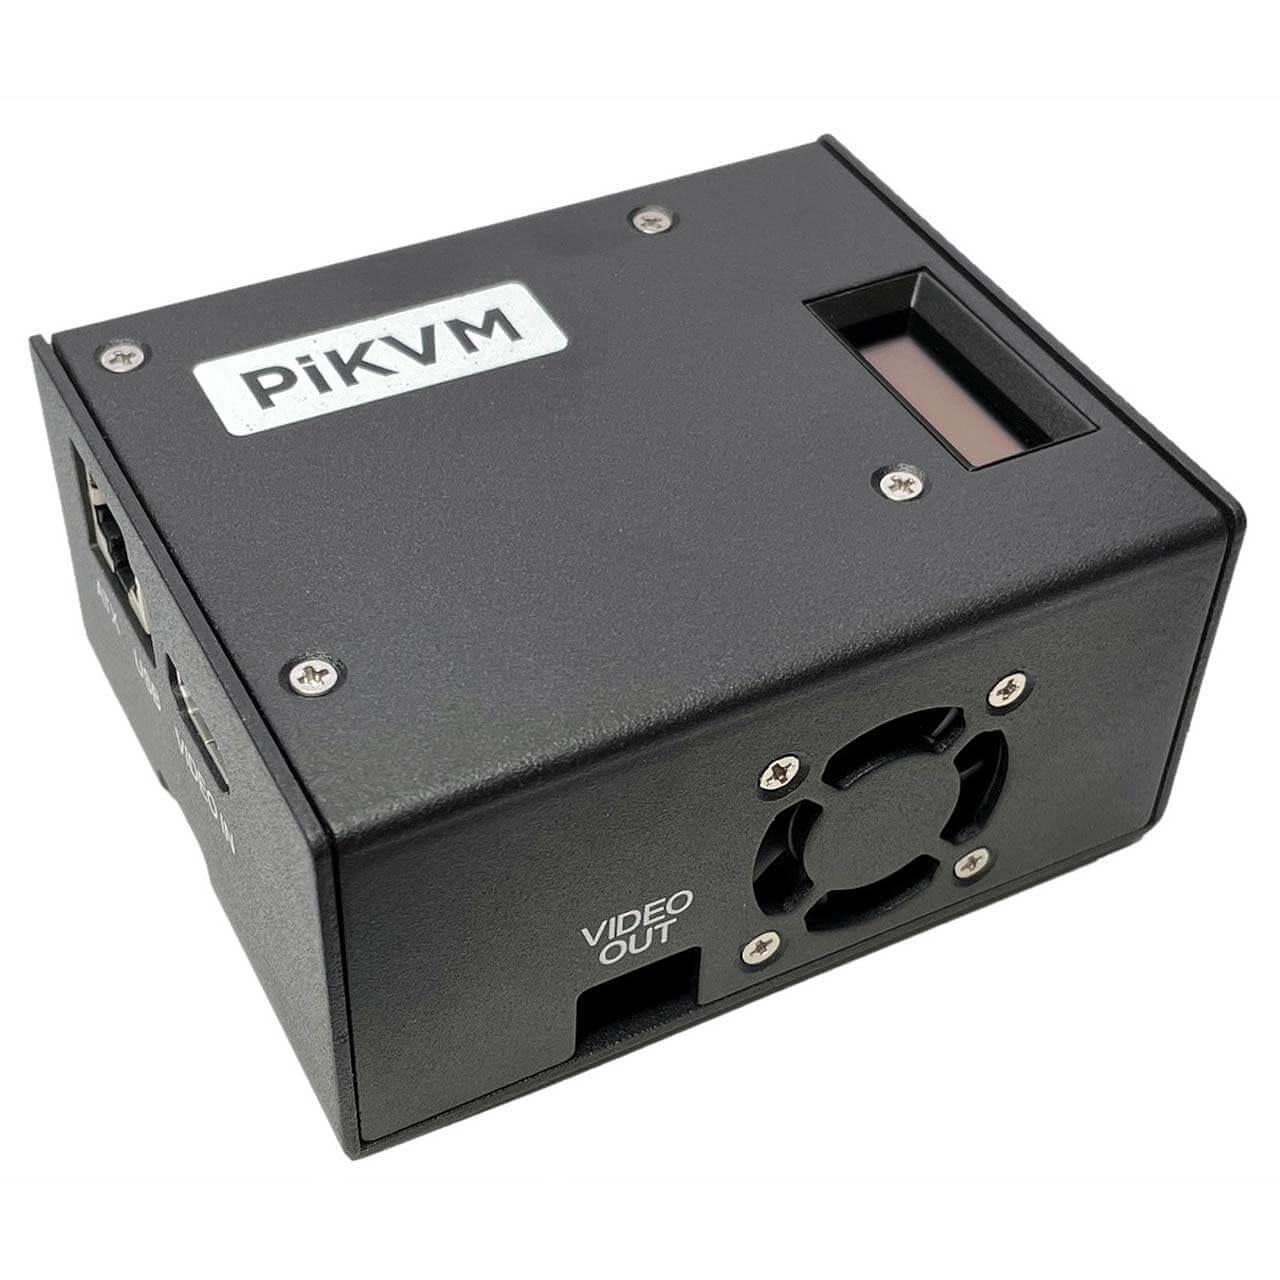 Steel Case for PiKVM - The Pi Hut